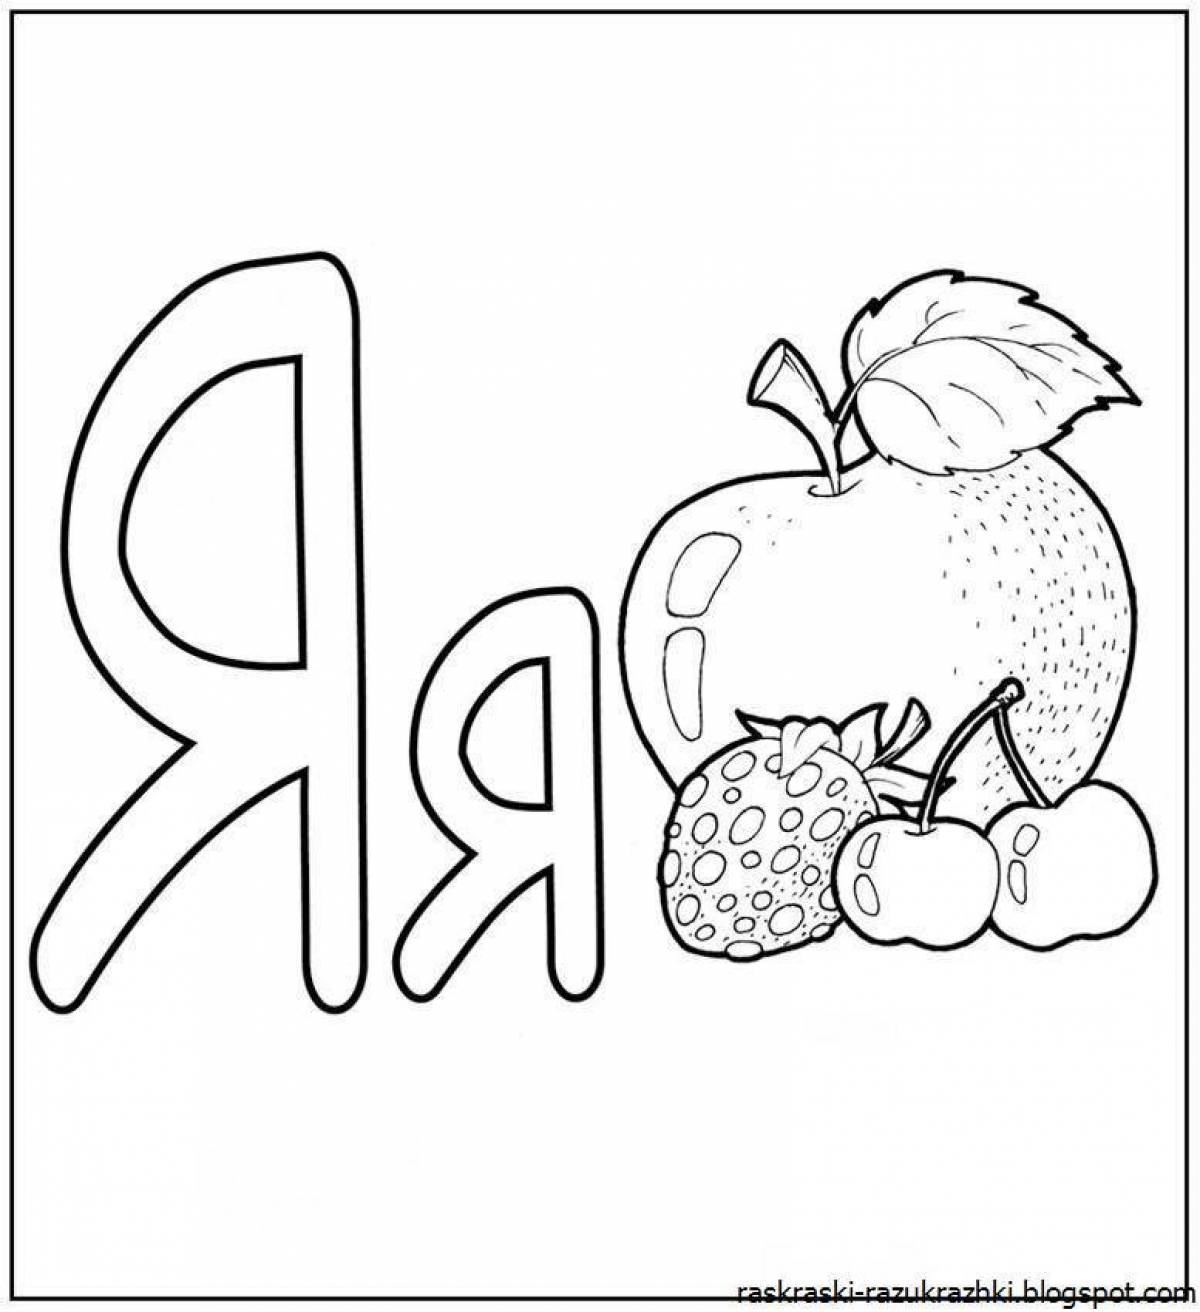 Colorful word coloring pages for kids